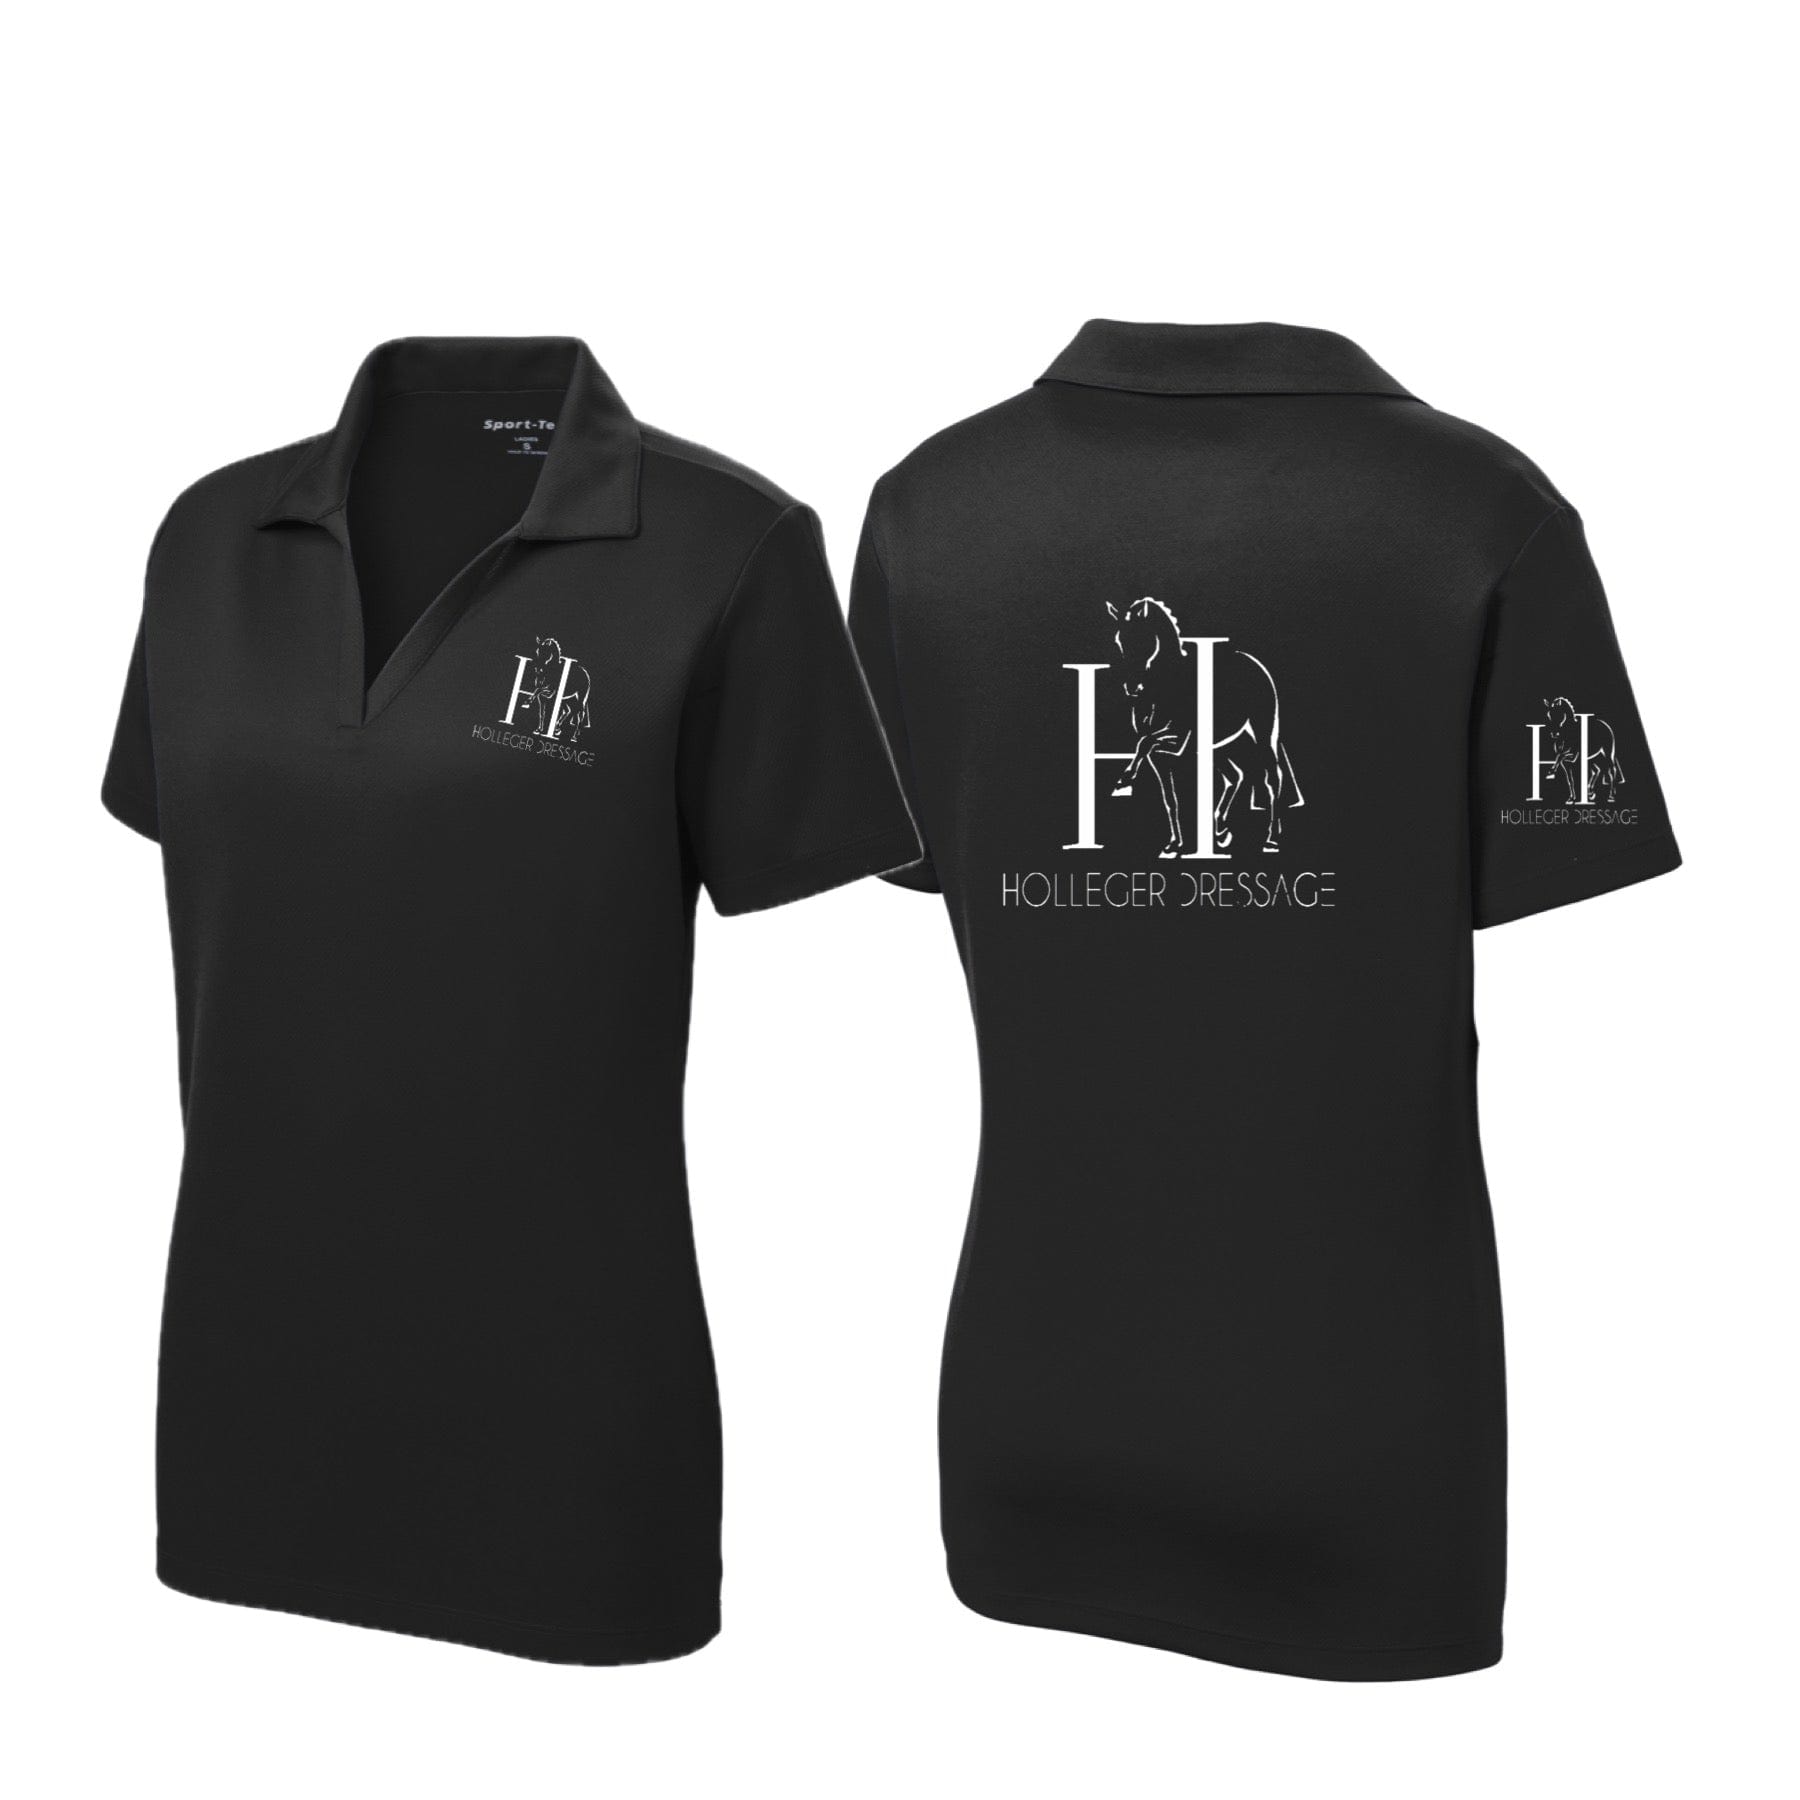 Equestrian Team Apparel Holleger Dressage Polo Shirt equestrian team apparel online tack store mobile tack store custom farm apparel custom show stable clothing equestrian lifestyle horse show clothing riding clothes horses equestrian tack store